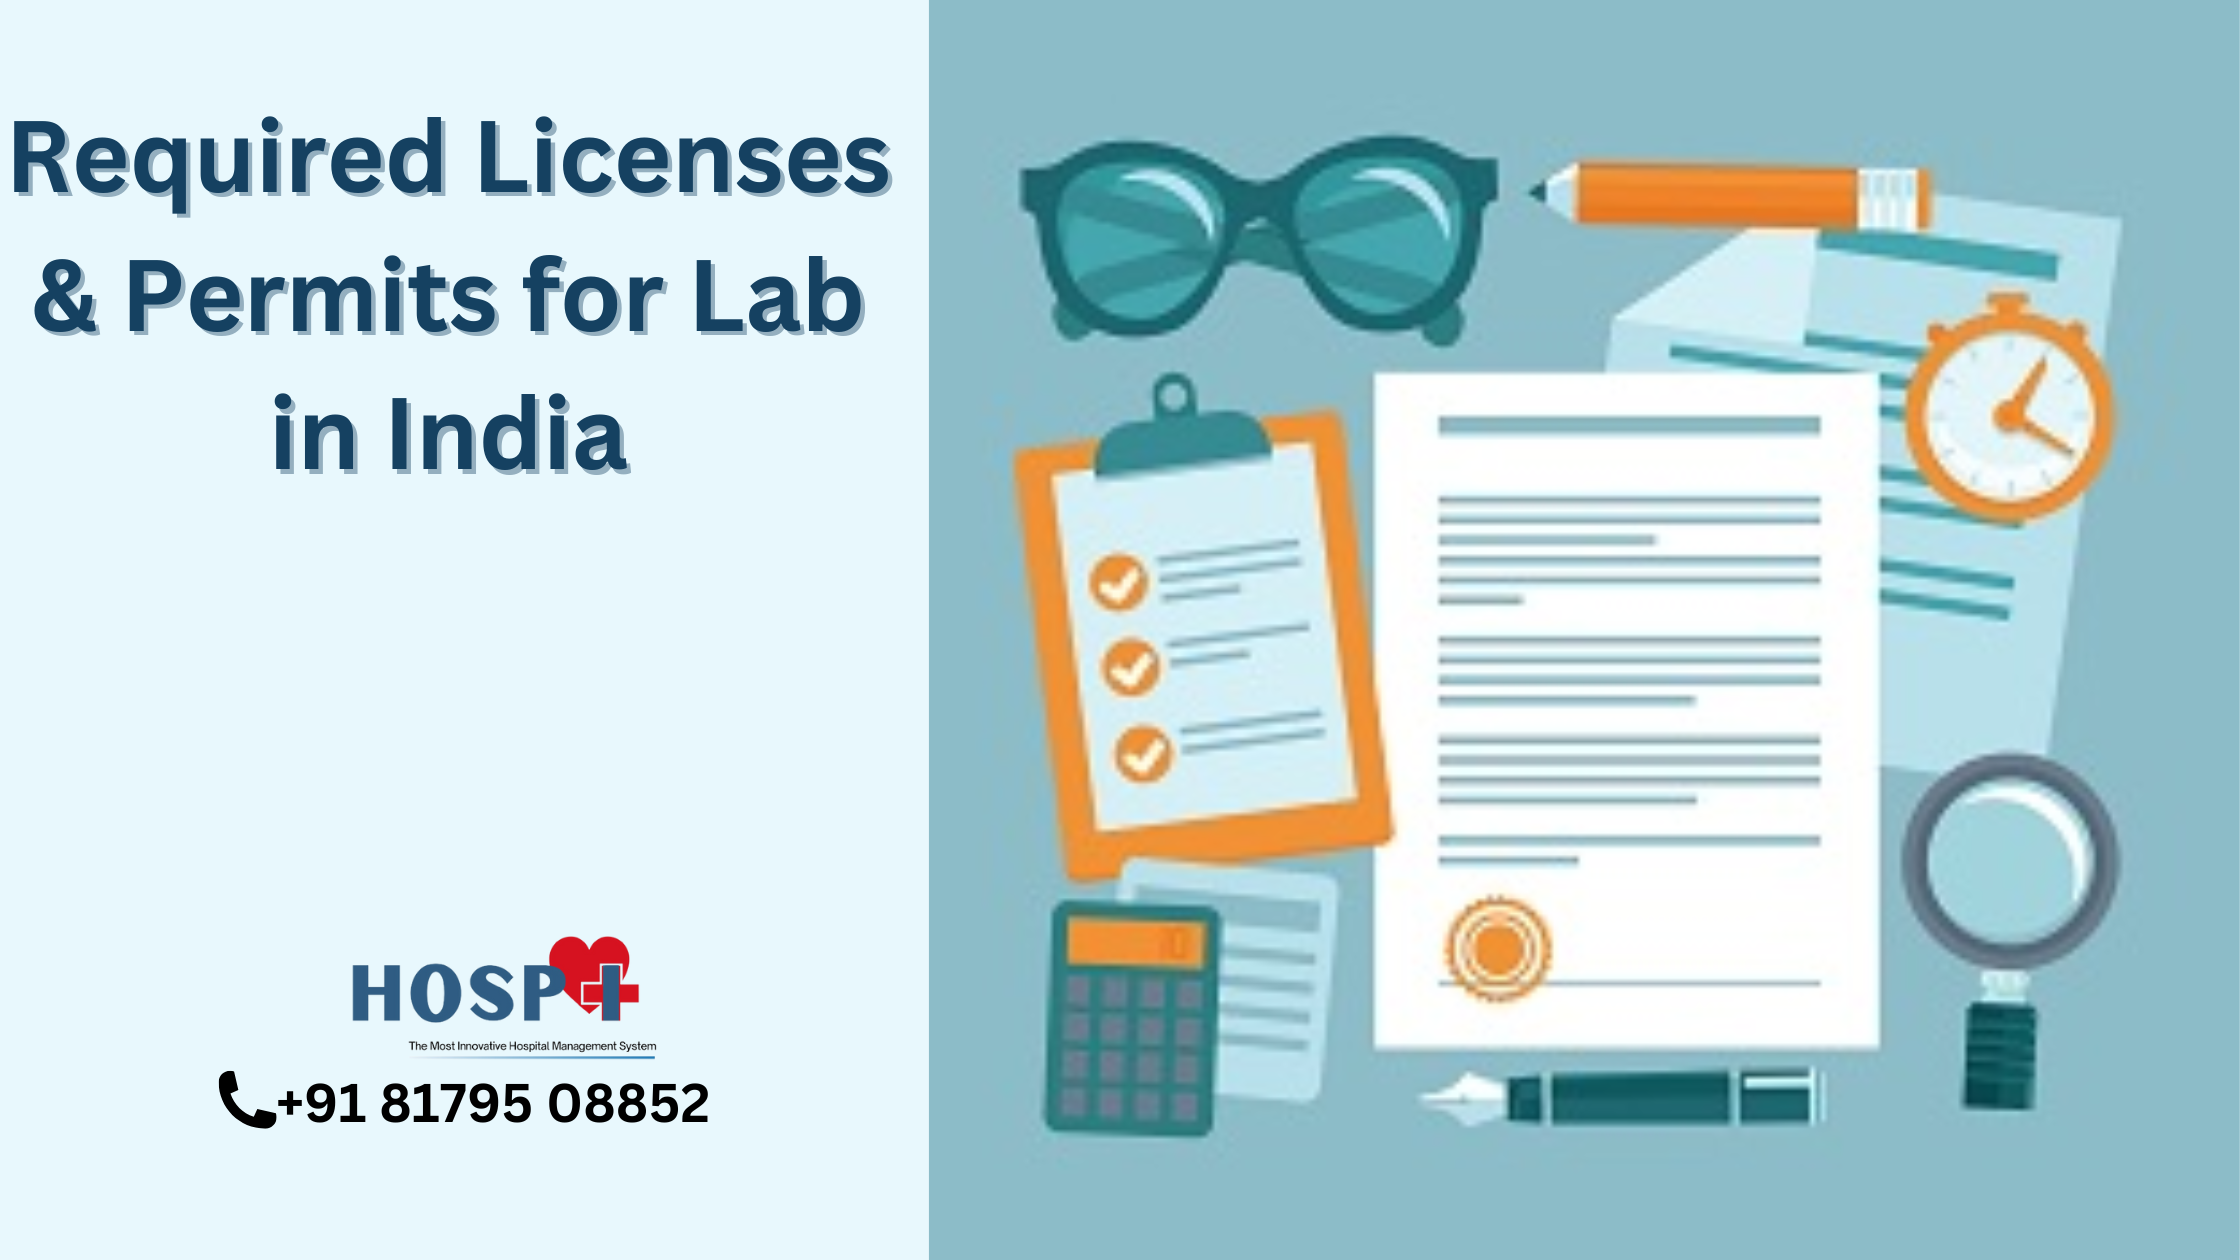 Required Licenses & Permits for Lab in India